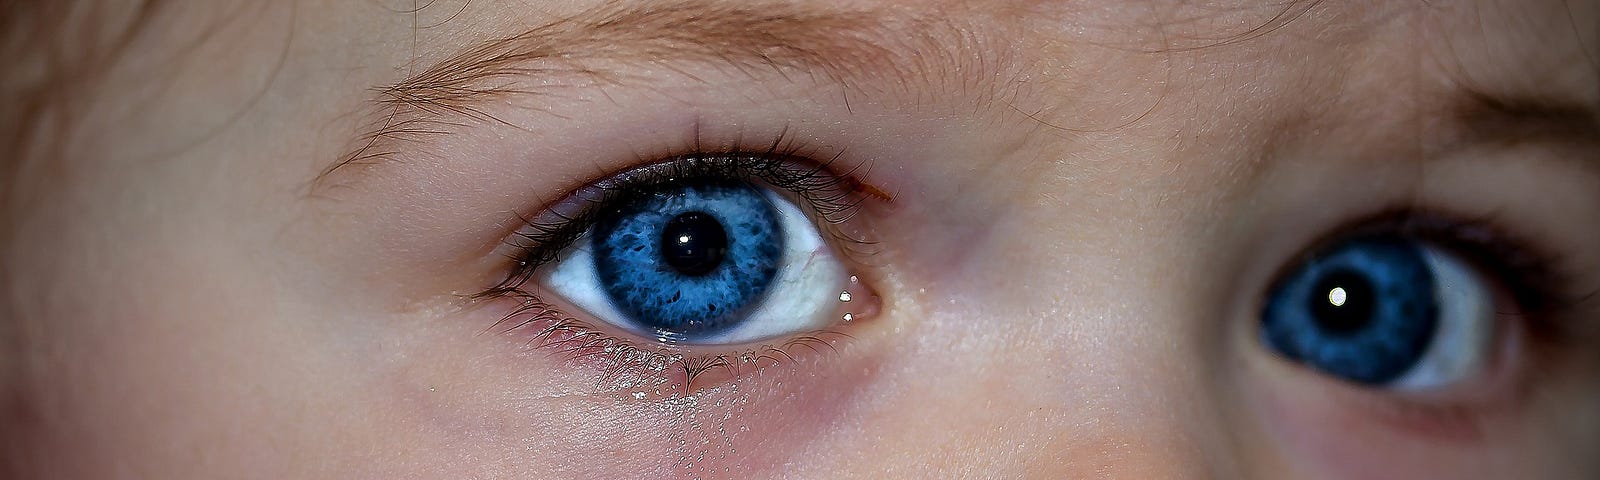 Close up of a baby’s crying blue eyes.